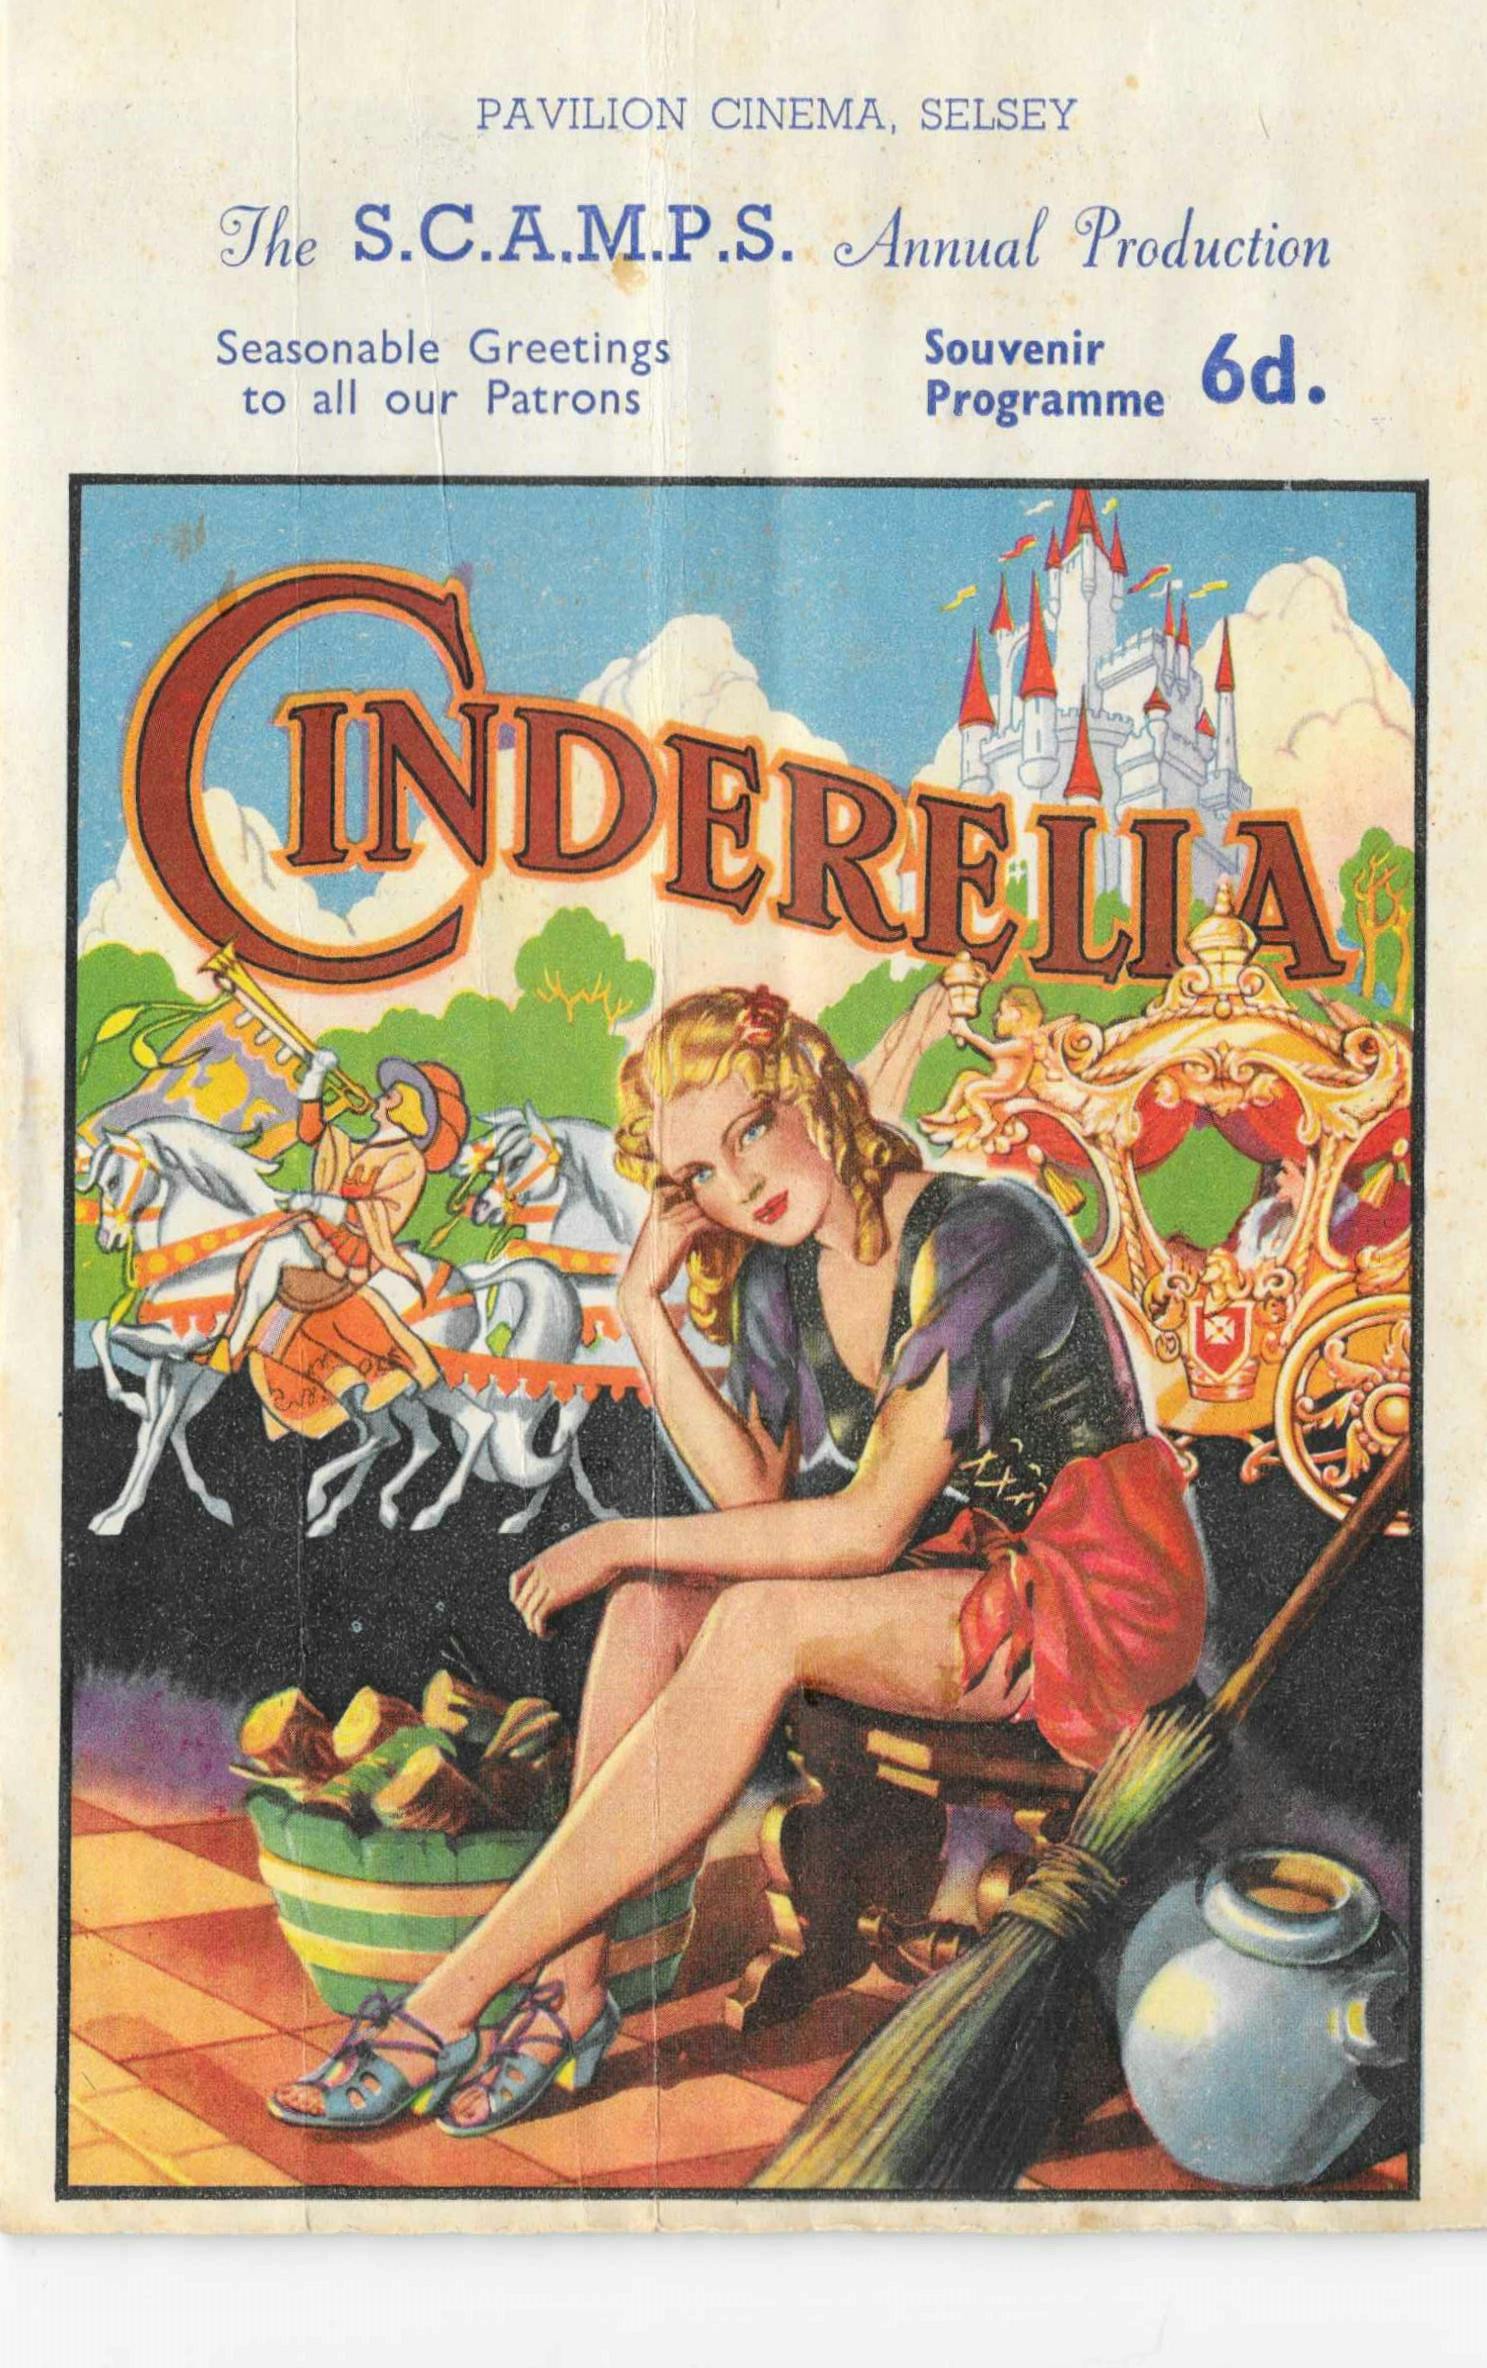 S.C.A.M.P.S Programme for 1953 Performance of Cinderella